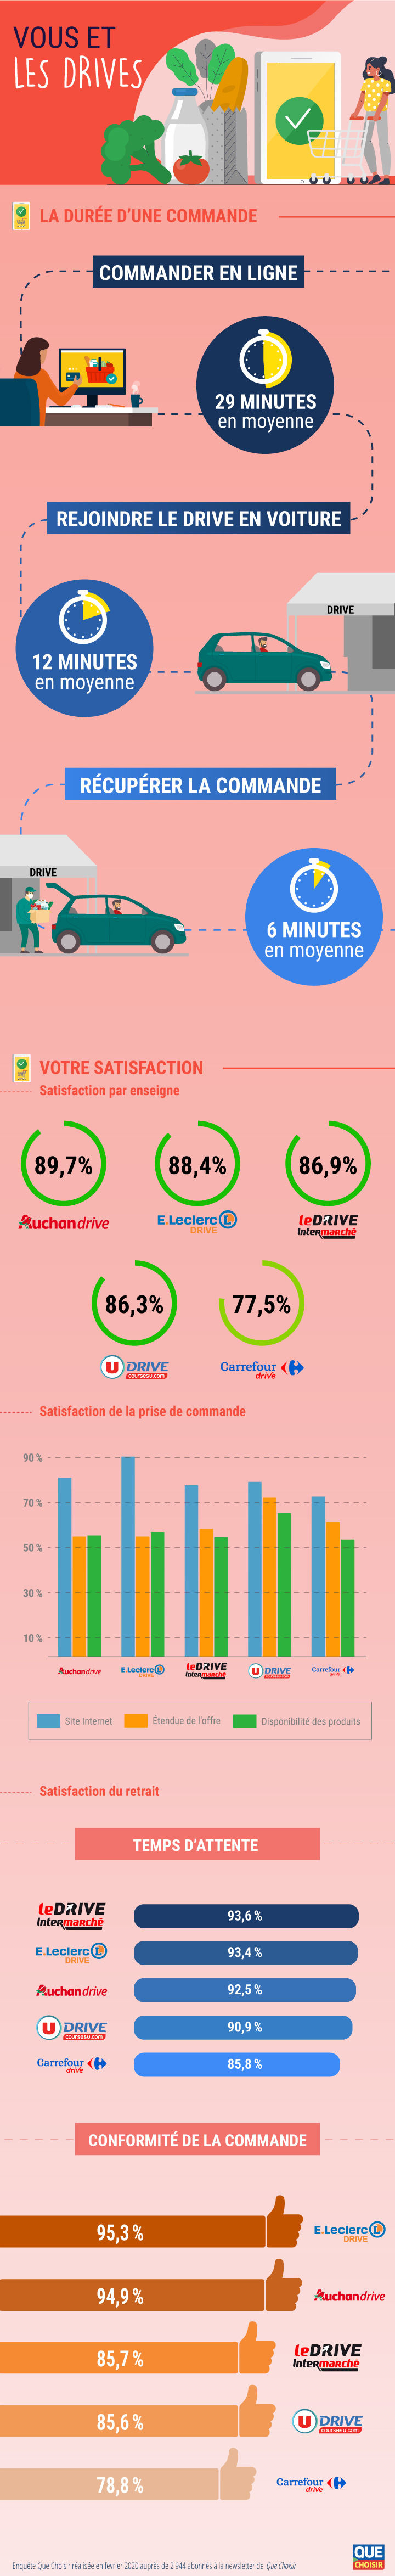 infographie drive